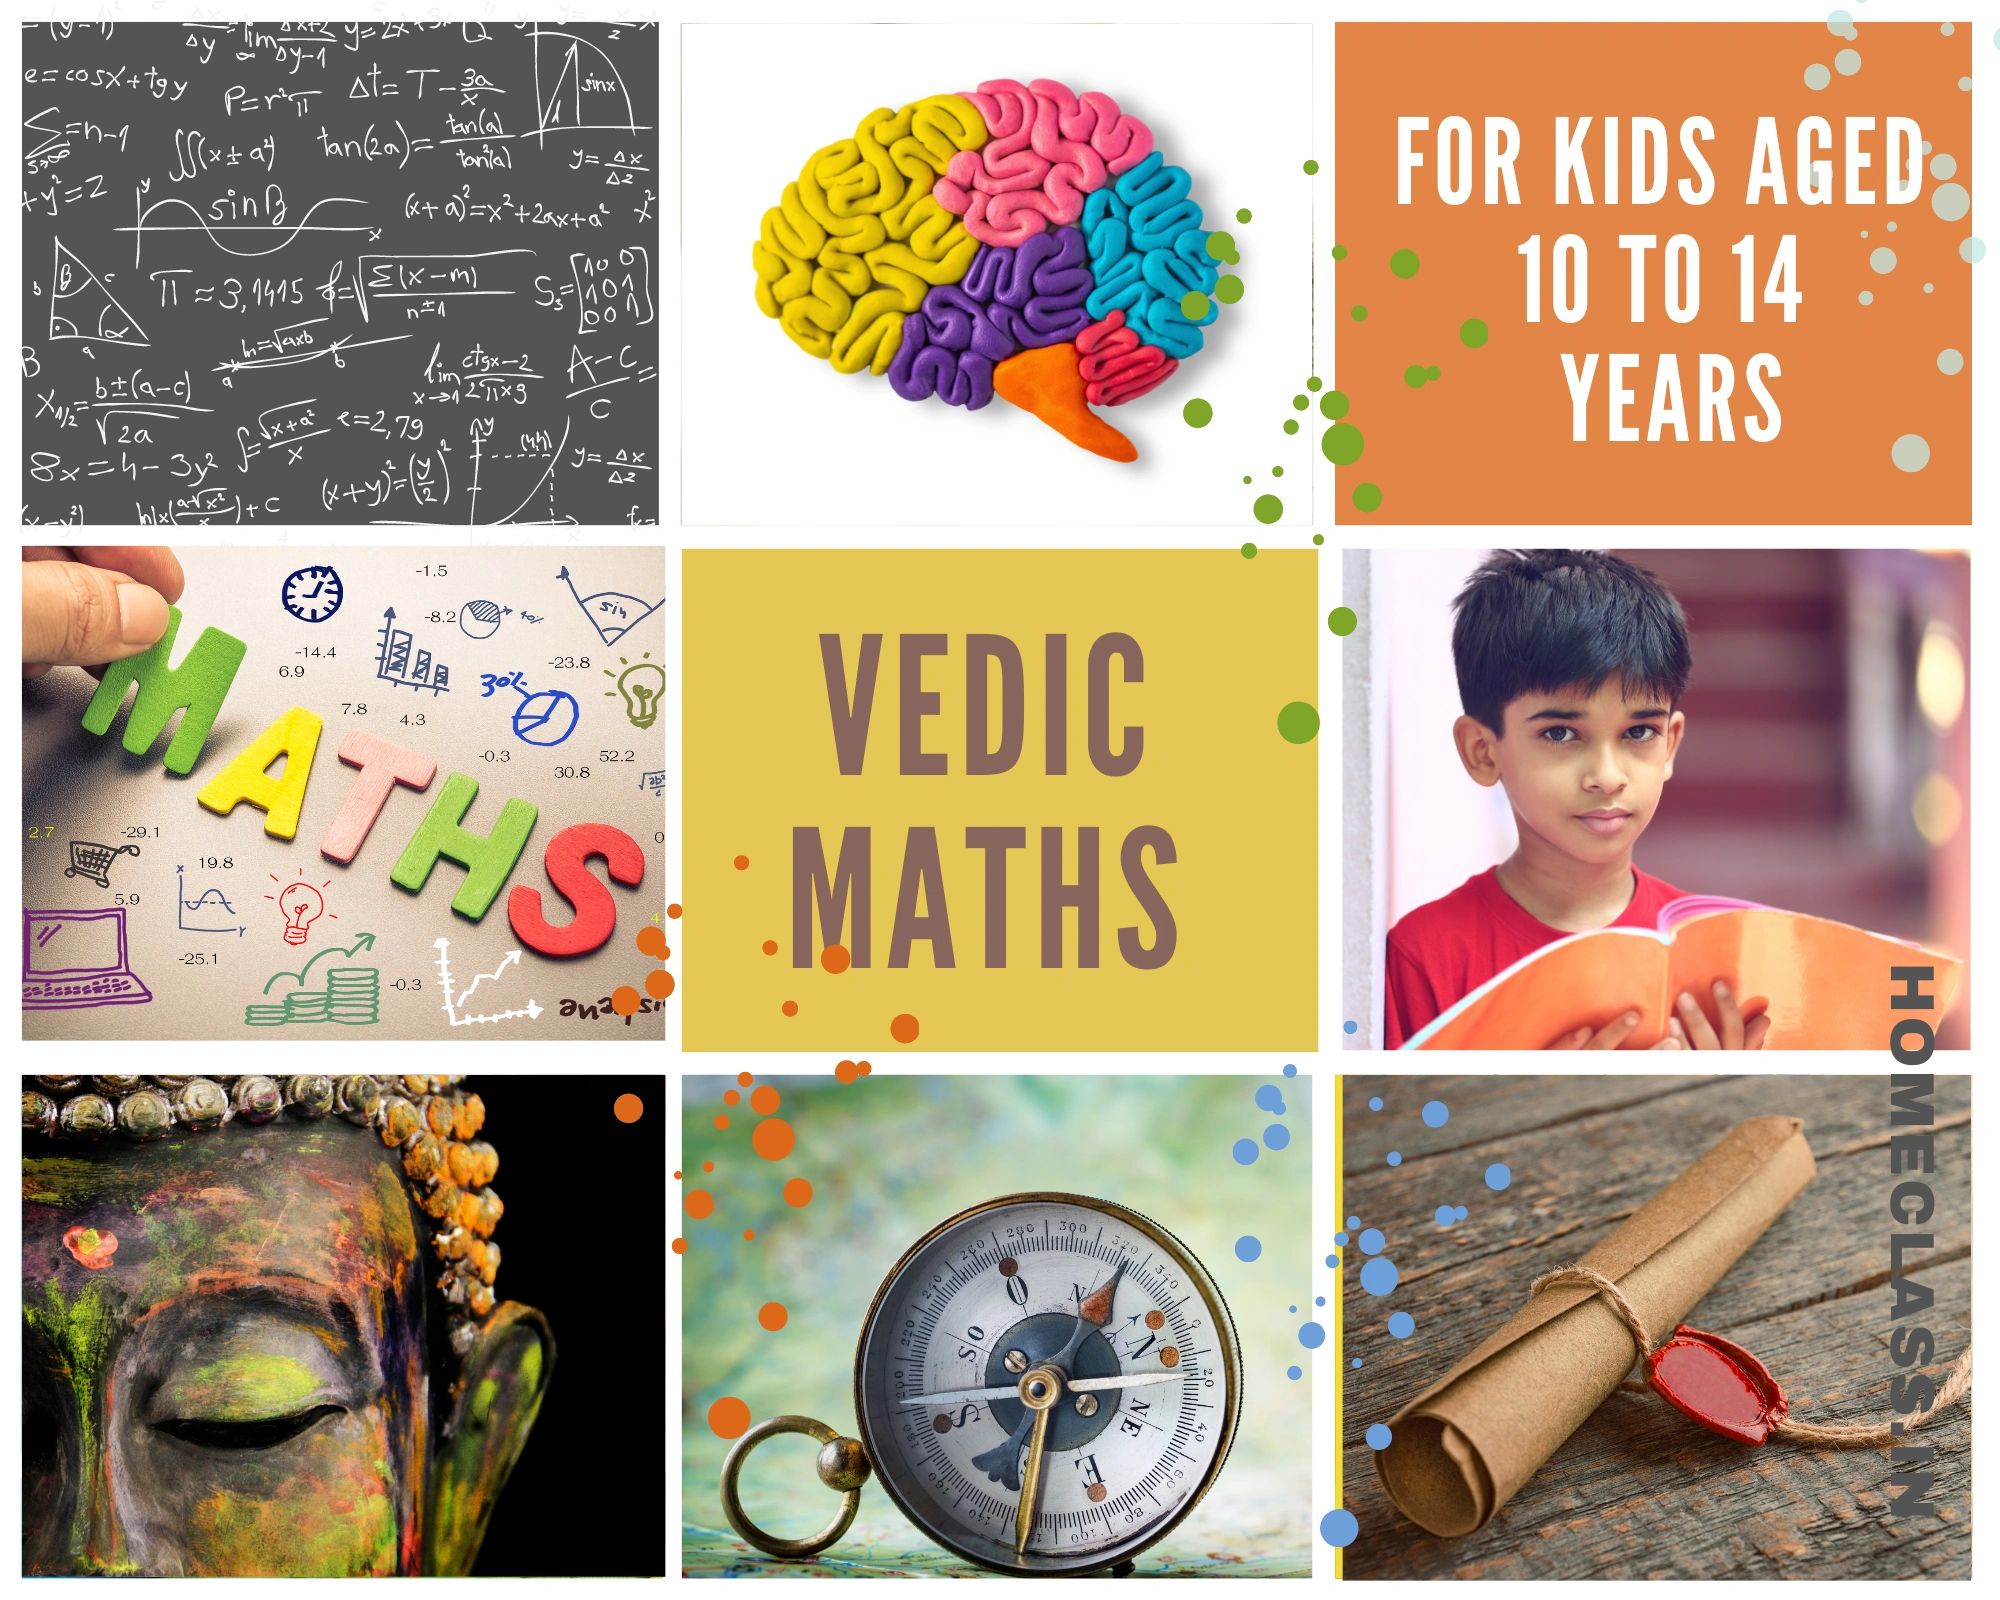 Vedic maths classes by homeclass. Online classes for grade 4 to 8th. Learn ancient mathematics. 